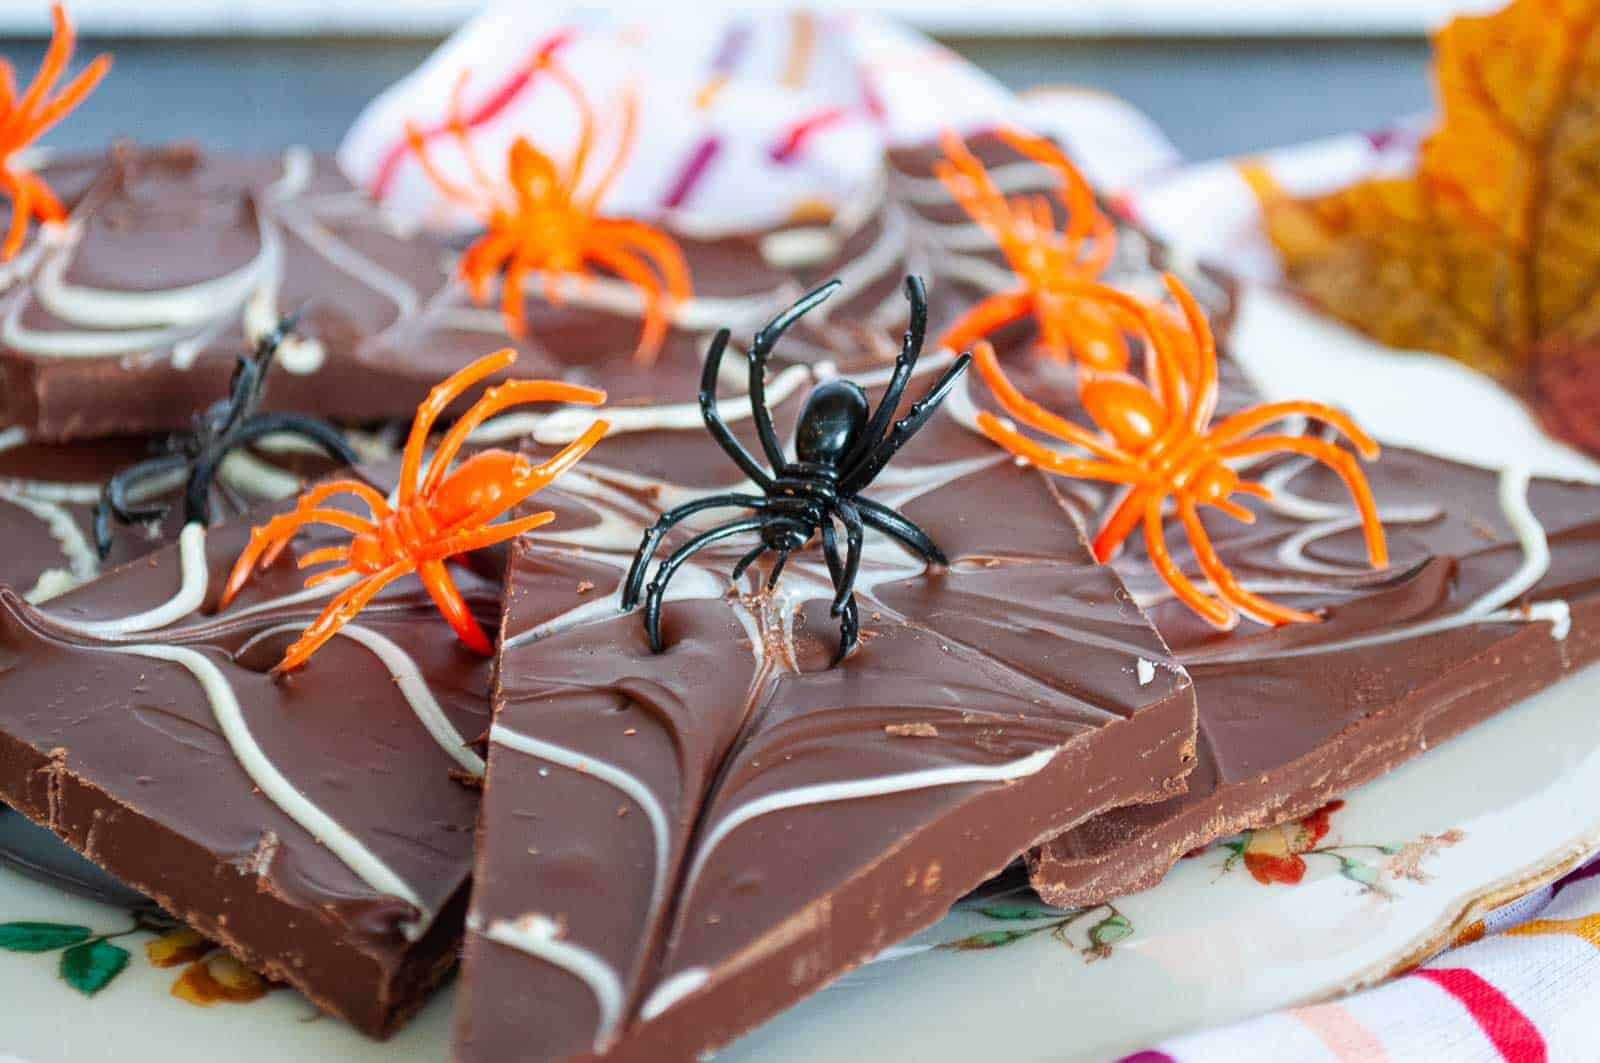 A plate of chocolate bark with spider webs and plastic spiders on it.